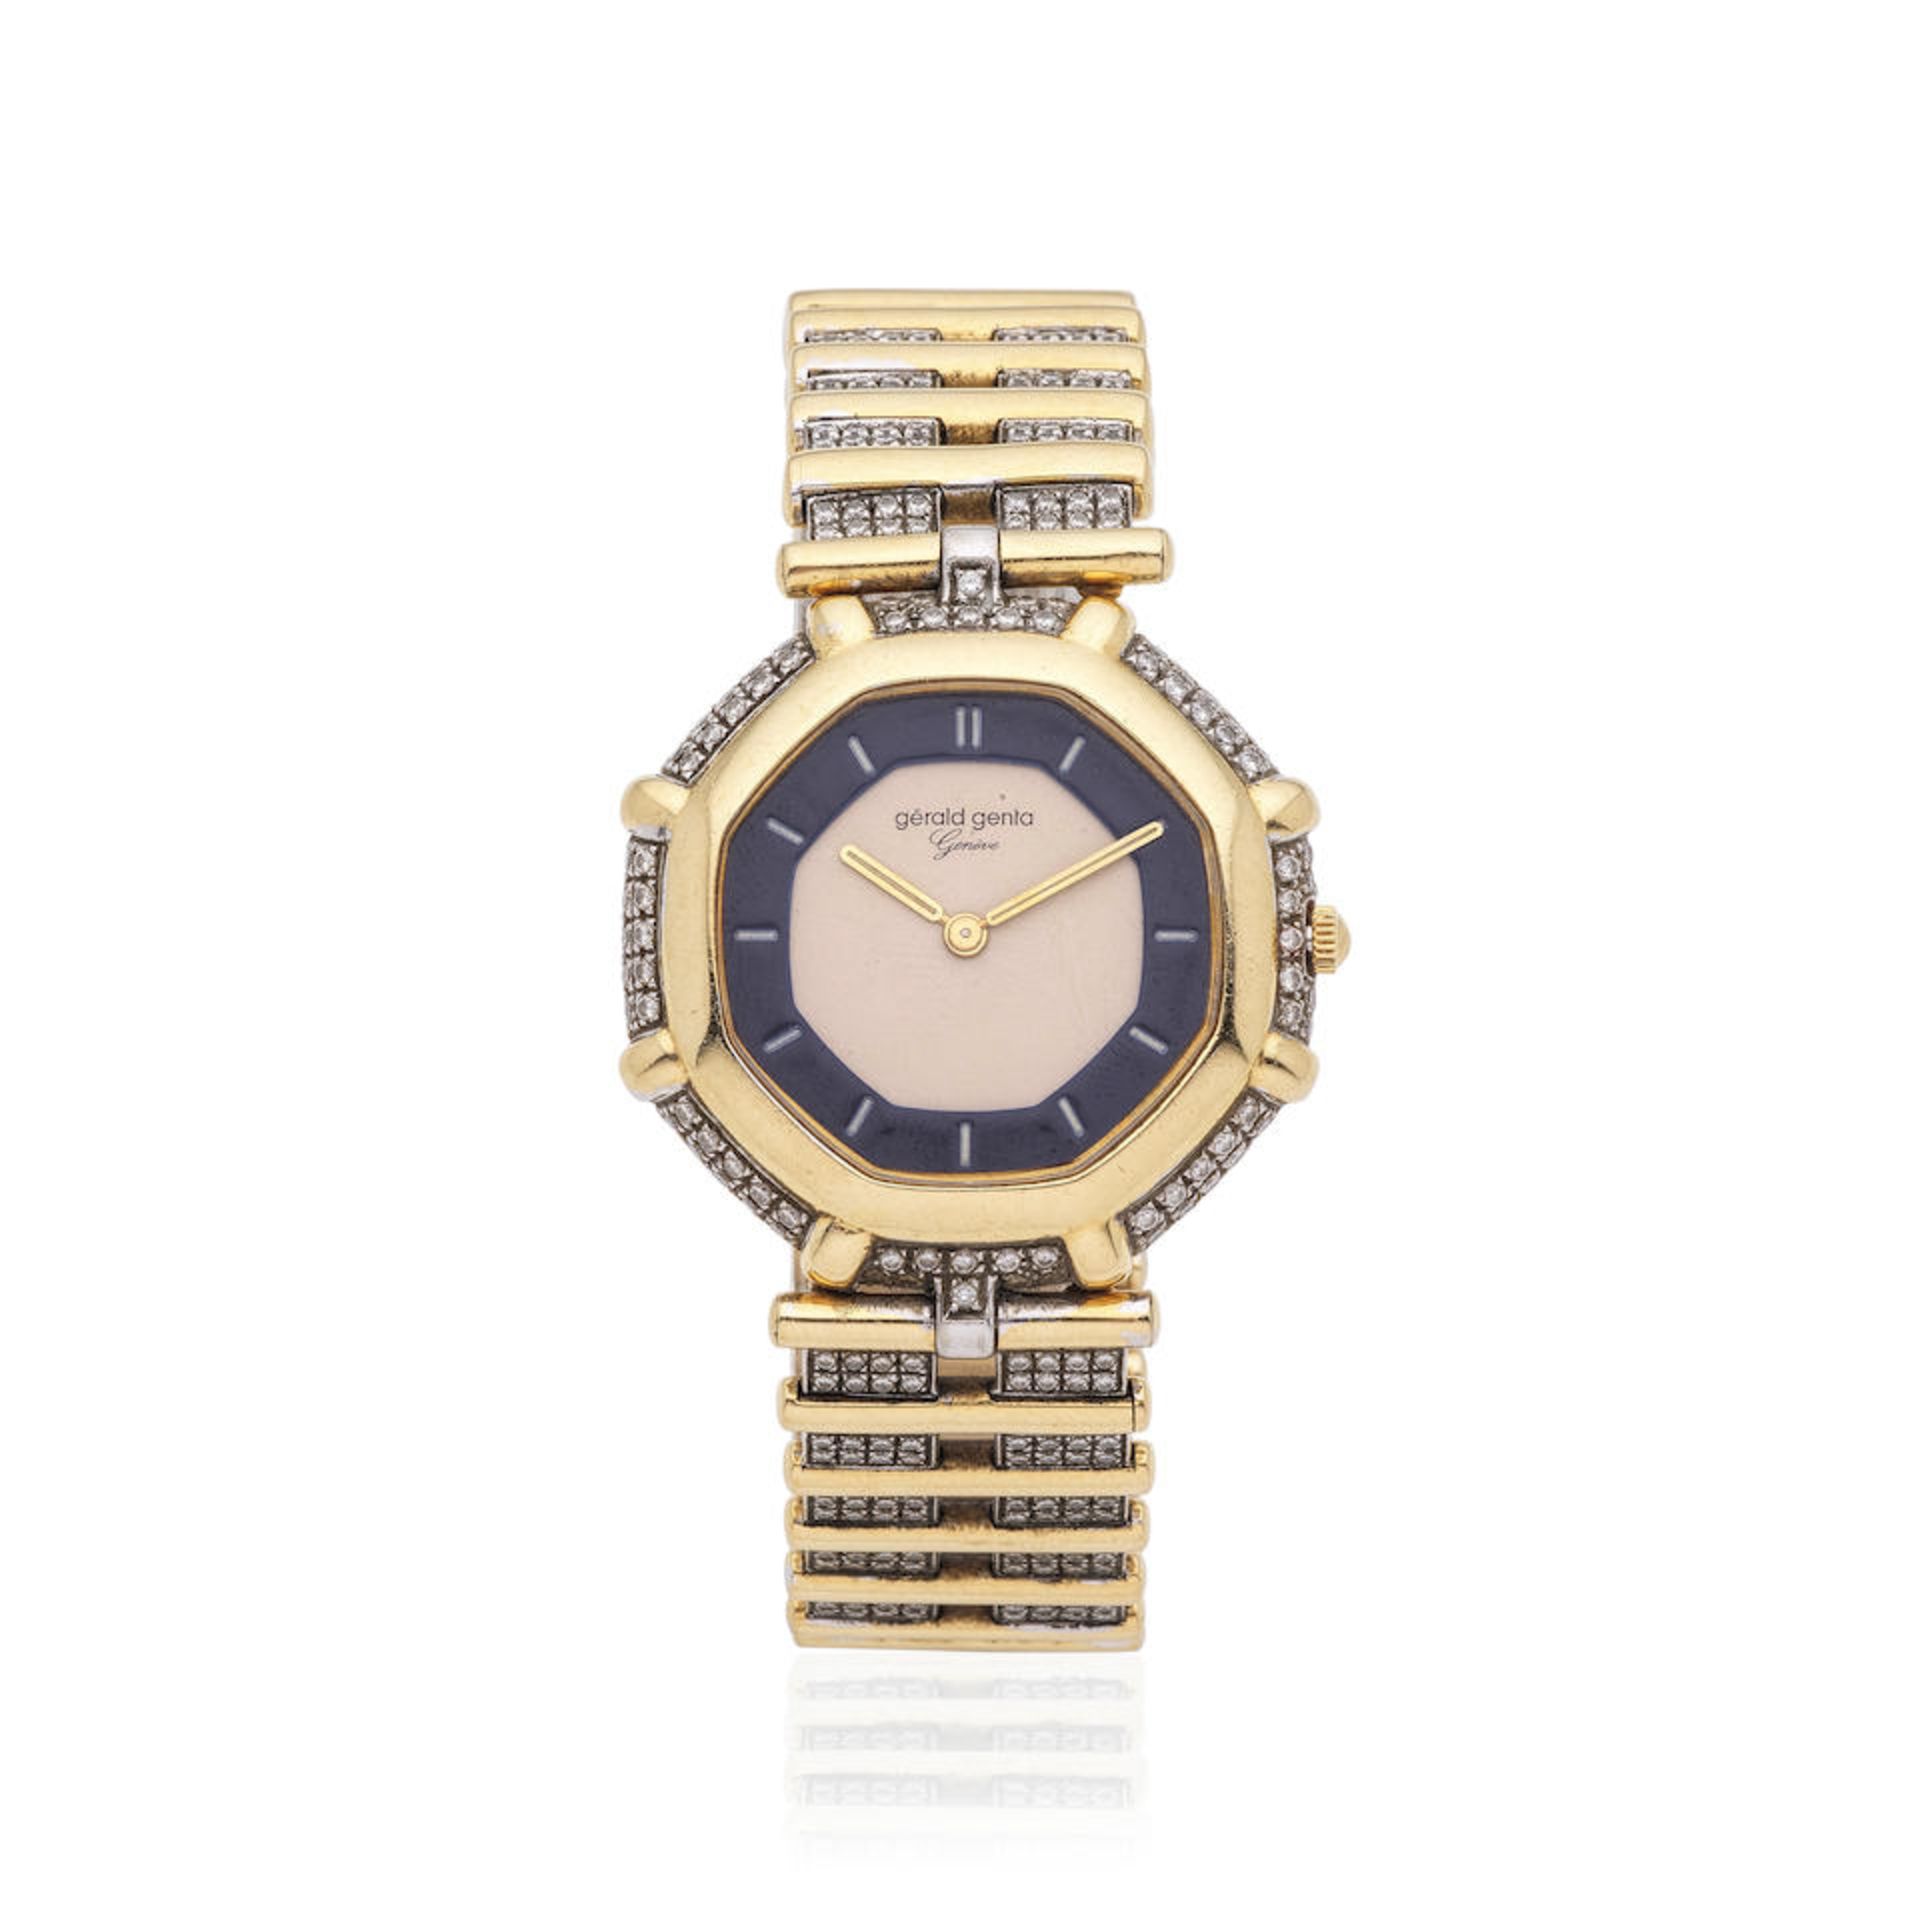 Gerald Genta. An 18K white and yellow gold automatic bracelet watch with diamond set bezel and b...